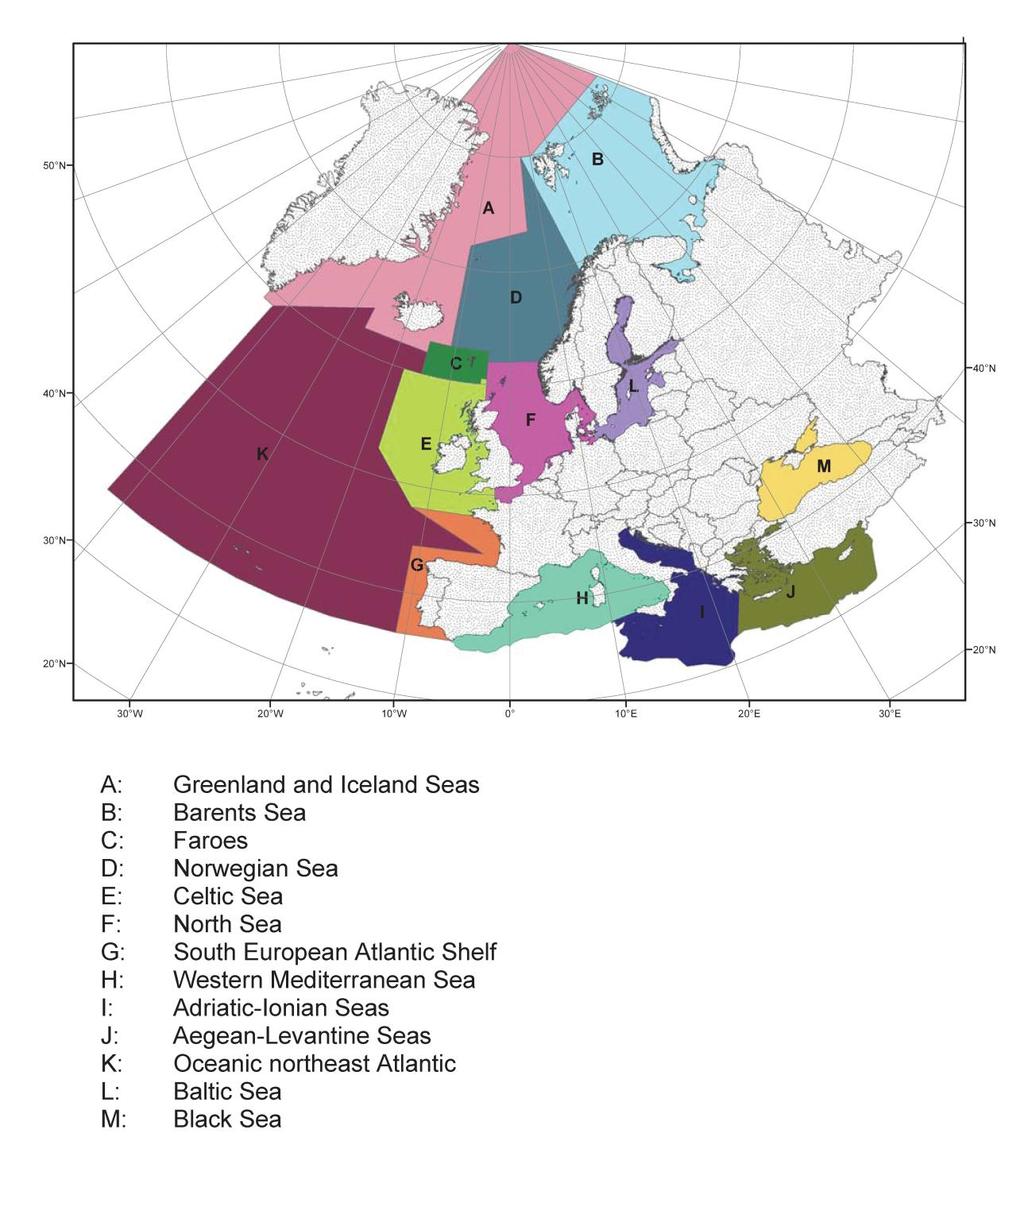 Characteristics of multispecific fisheries in the European Union Map 3: Ecoregions based on ICES Advice ACFM